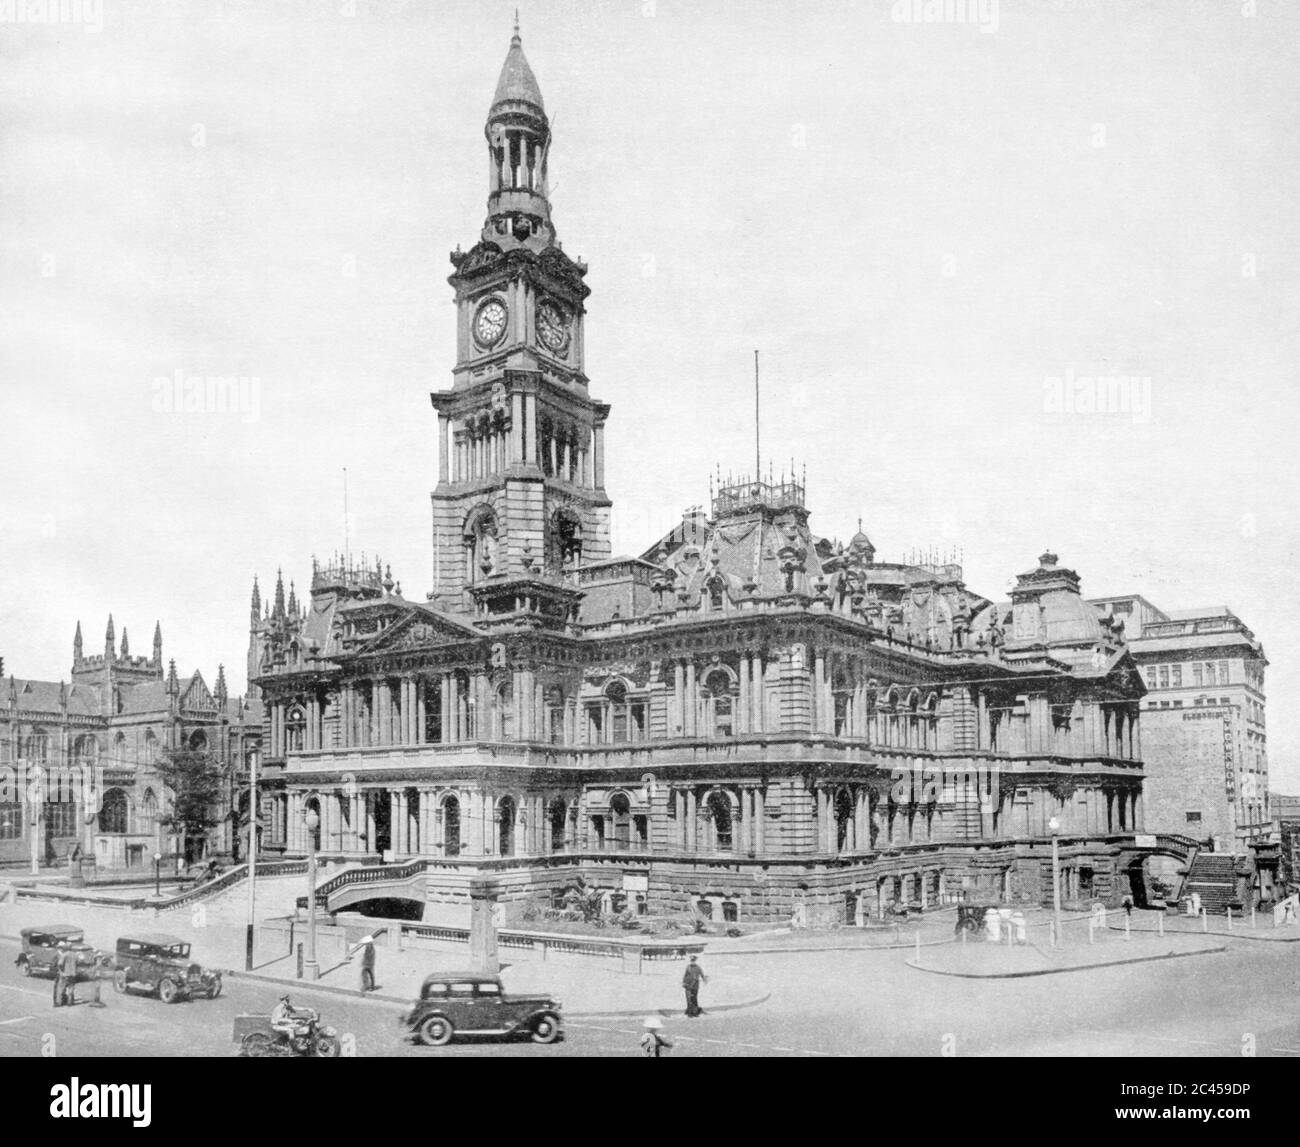 Sydney Australia 1938: The Sydney Town Hall in pre war Sydney with St Andrews Cathedral to its left. Curiously in the lower left corner two men appear to be having a close up (possibly heated) conversation of sorts. This image was published in a 1938 book by Municipal Council of Sydney to commemorate 'the 150th anniversary of the founding of a nation' Stock Photo